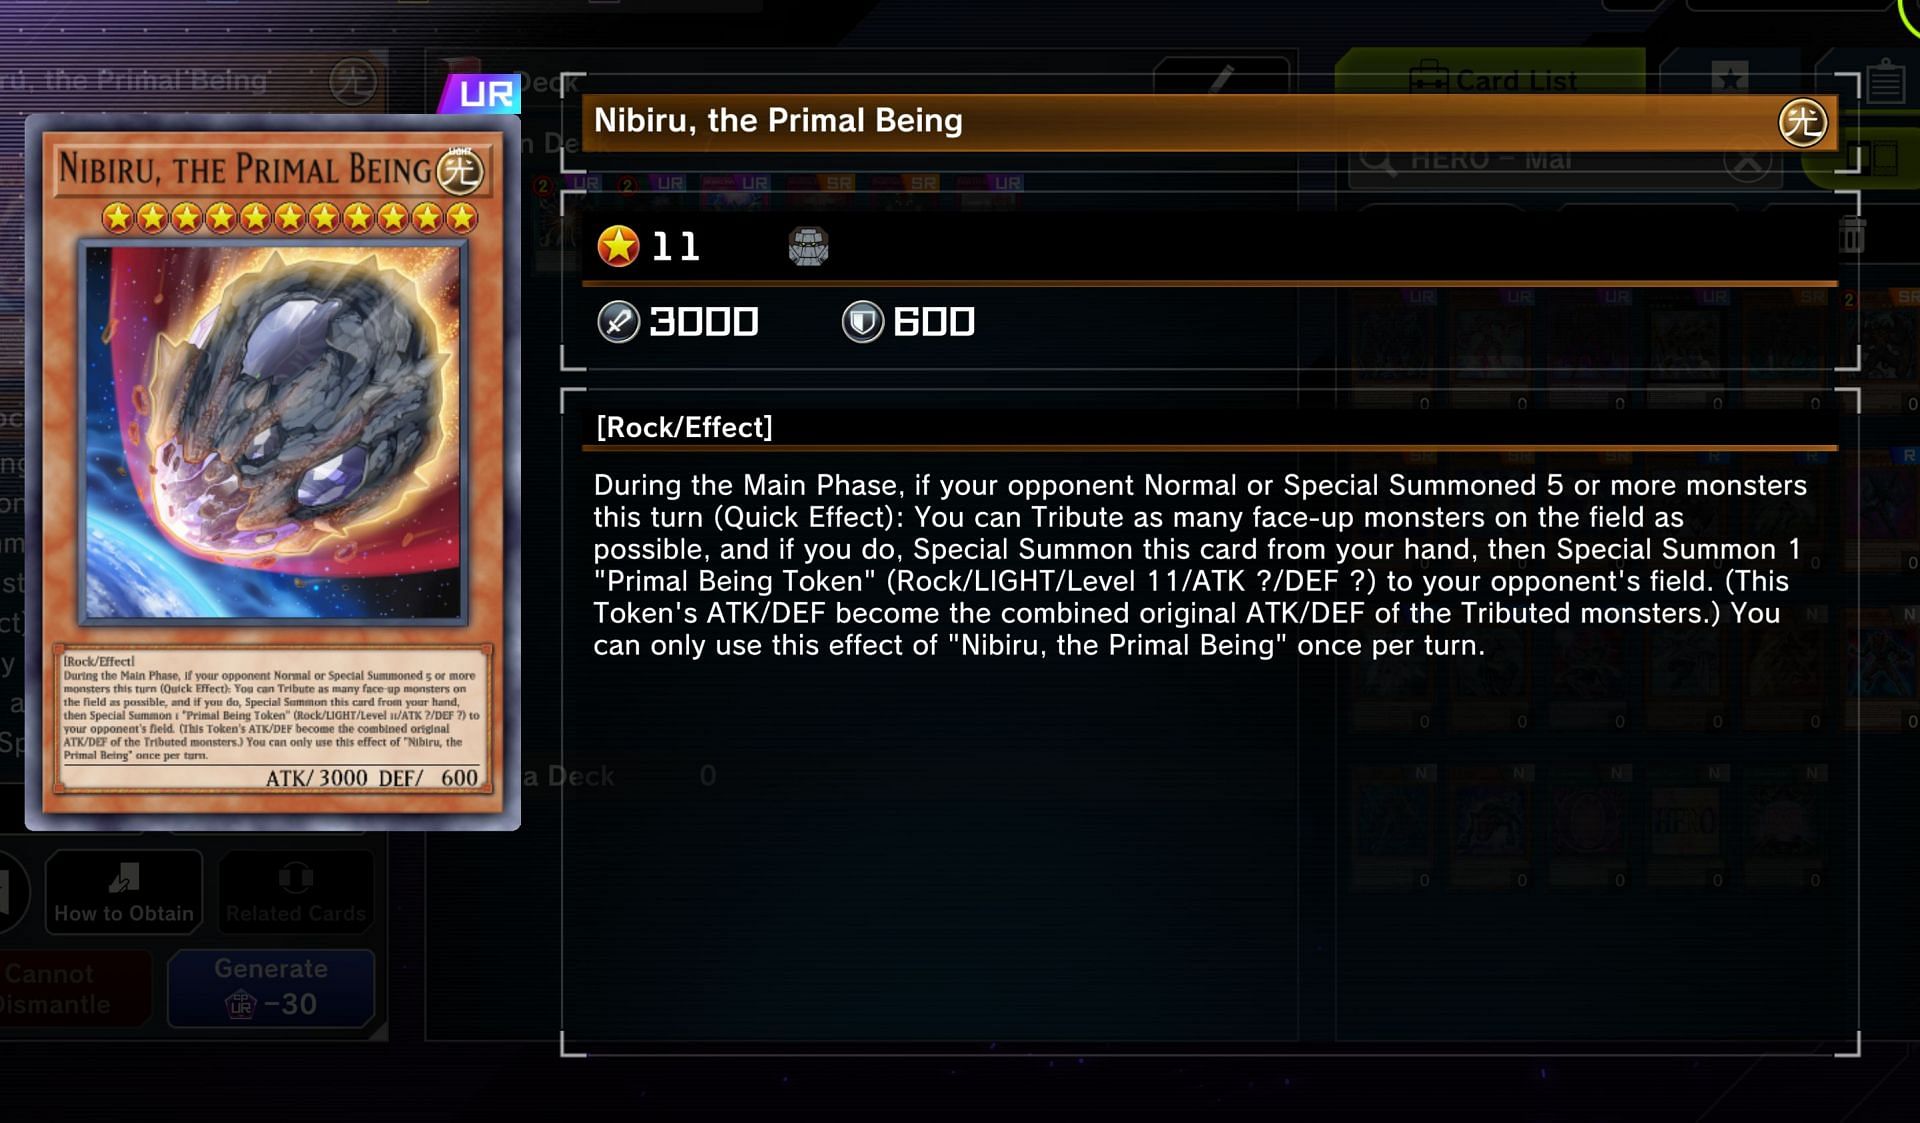 Nibiru, the Primal Being continues to be one of the most-useful cards in the game (Image via Konami)